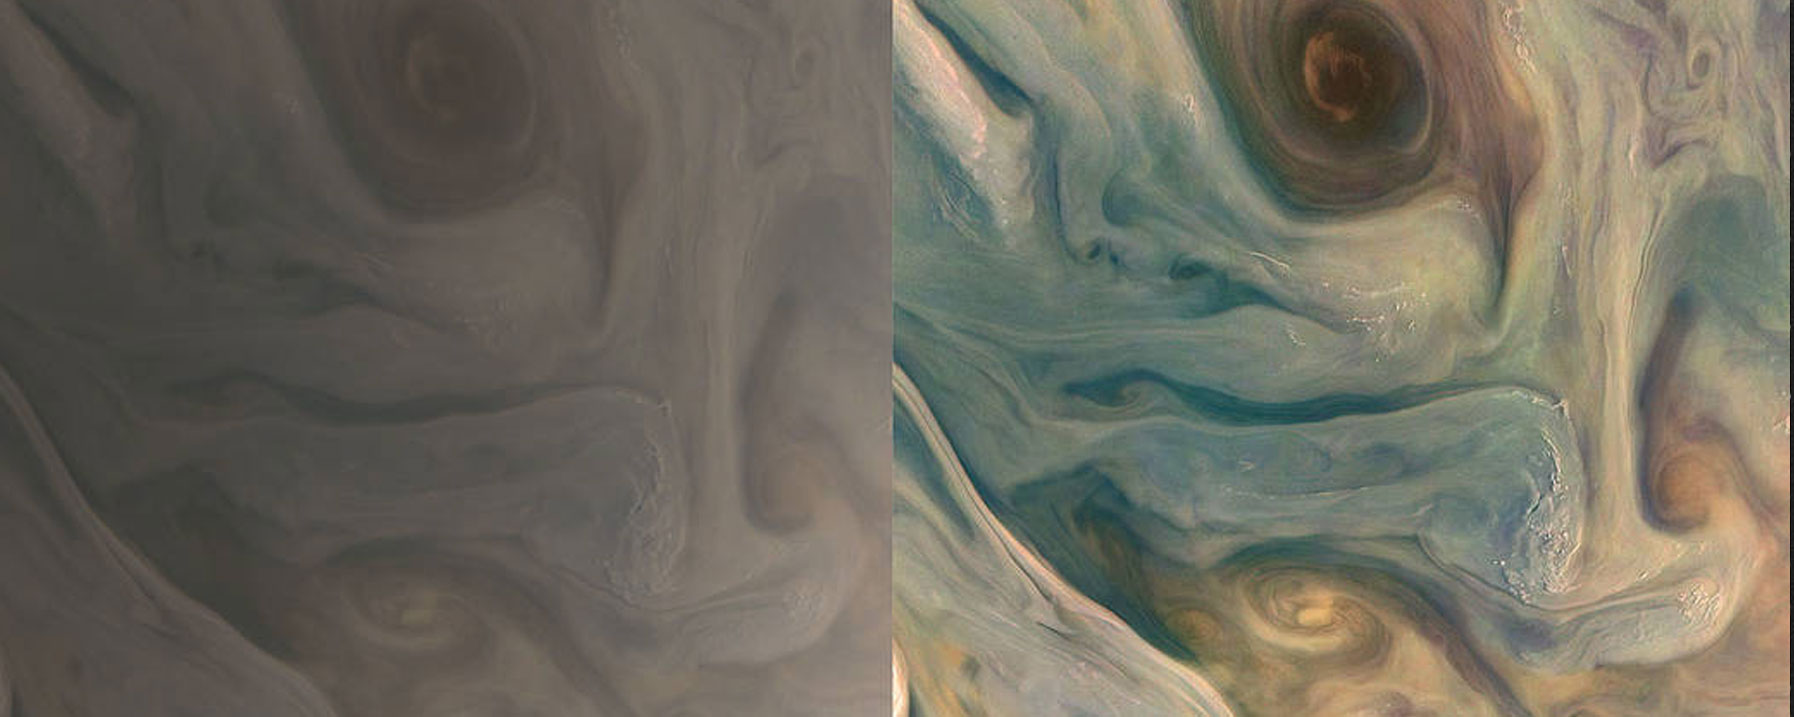 NASA’s Juno spacecraft observed the complex colors and structure of Jupiter’s clouds as it completed its 43rd close flyby of the giant planet on July 5, 2022.